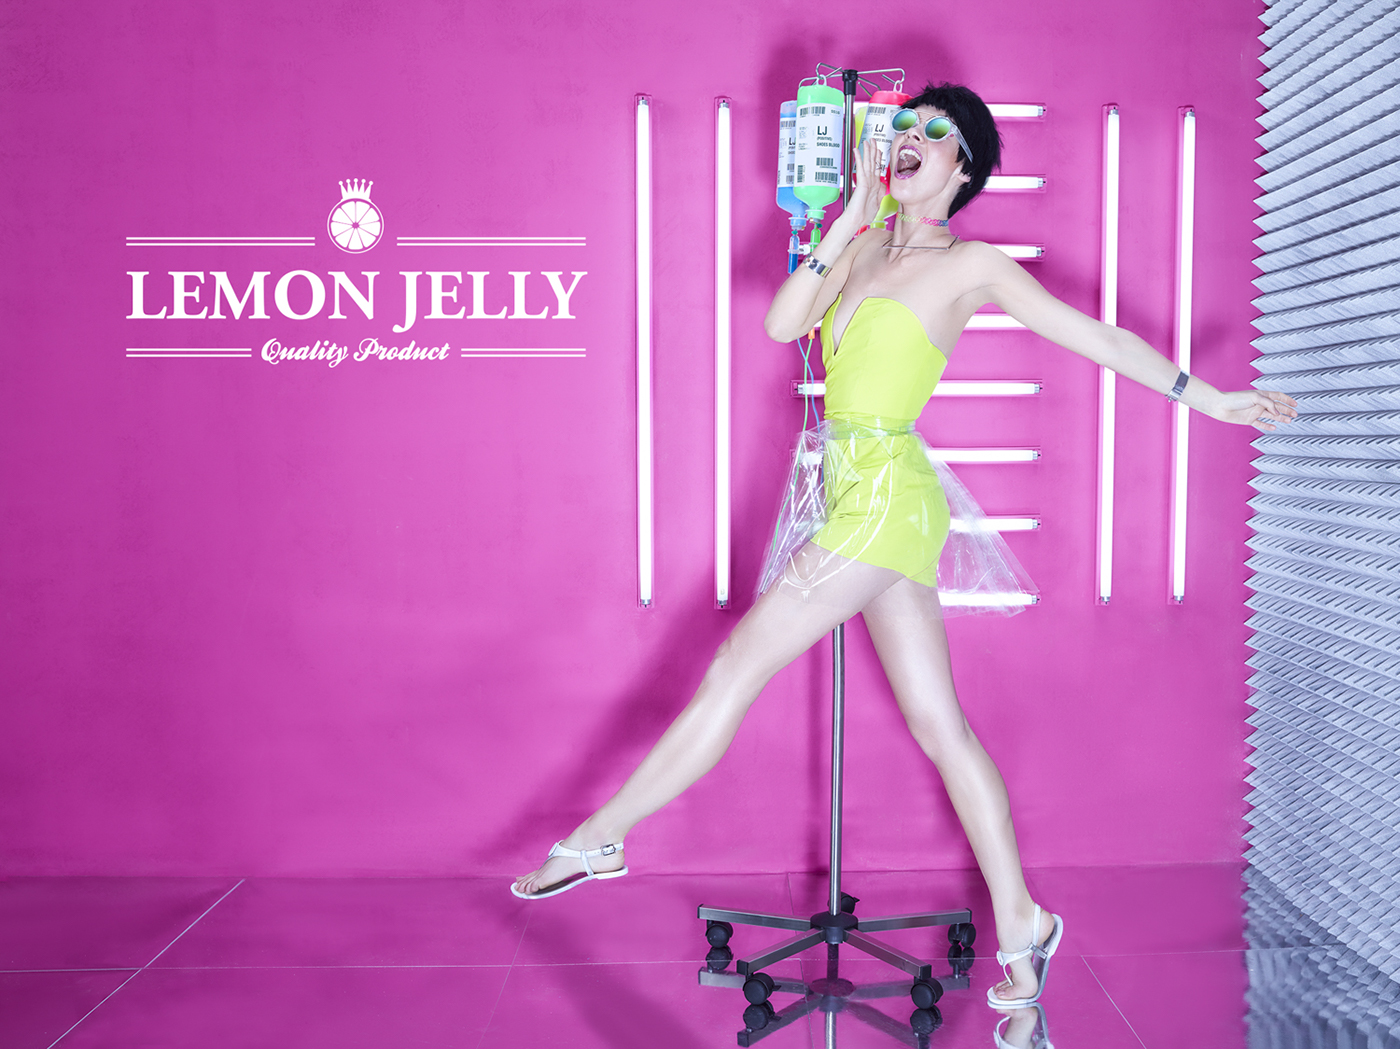 lalaland studios Lemon jelly Advertising  campaing Mad Scientist frederico martins Portugal shoes lemon jelly